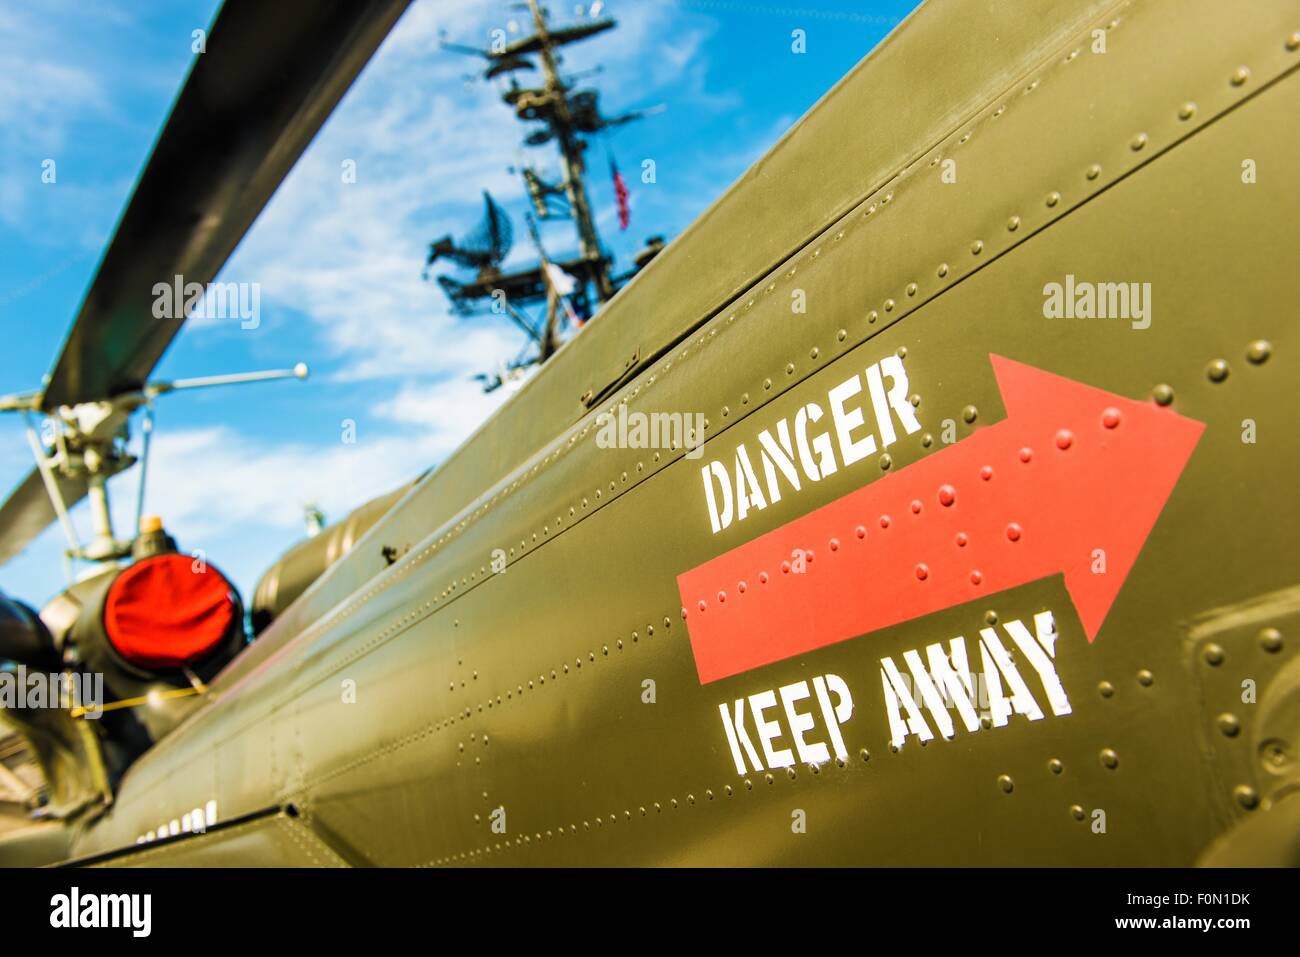 Danger Keep Away Military Site. Warning on Side of the Military Aircraft. Army Warship. Stock Photo